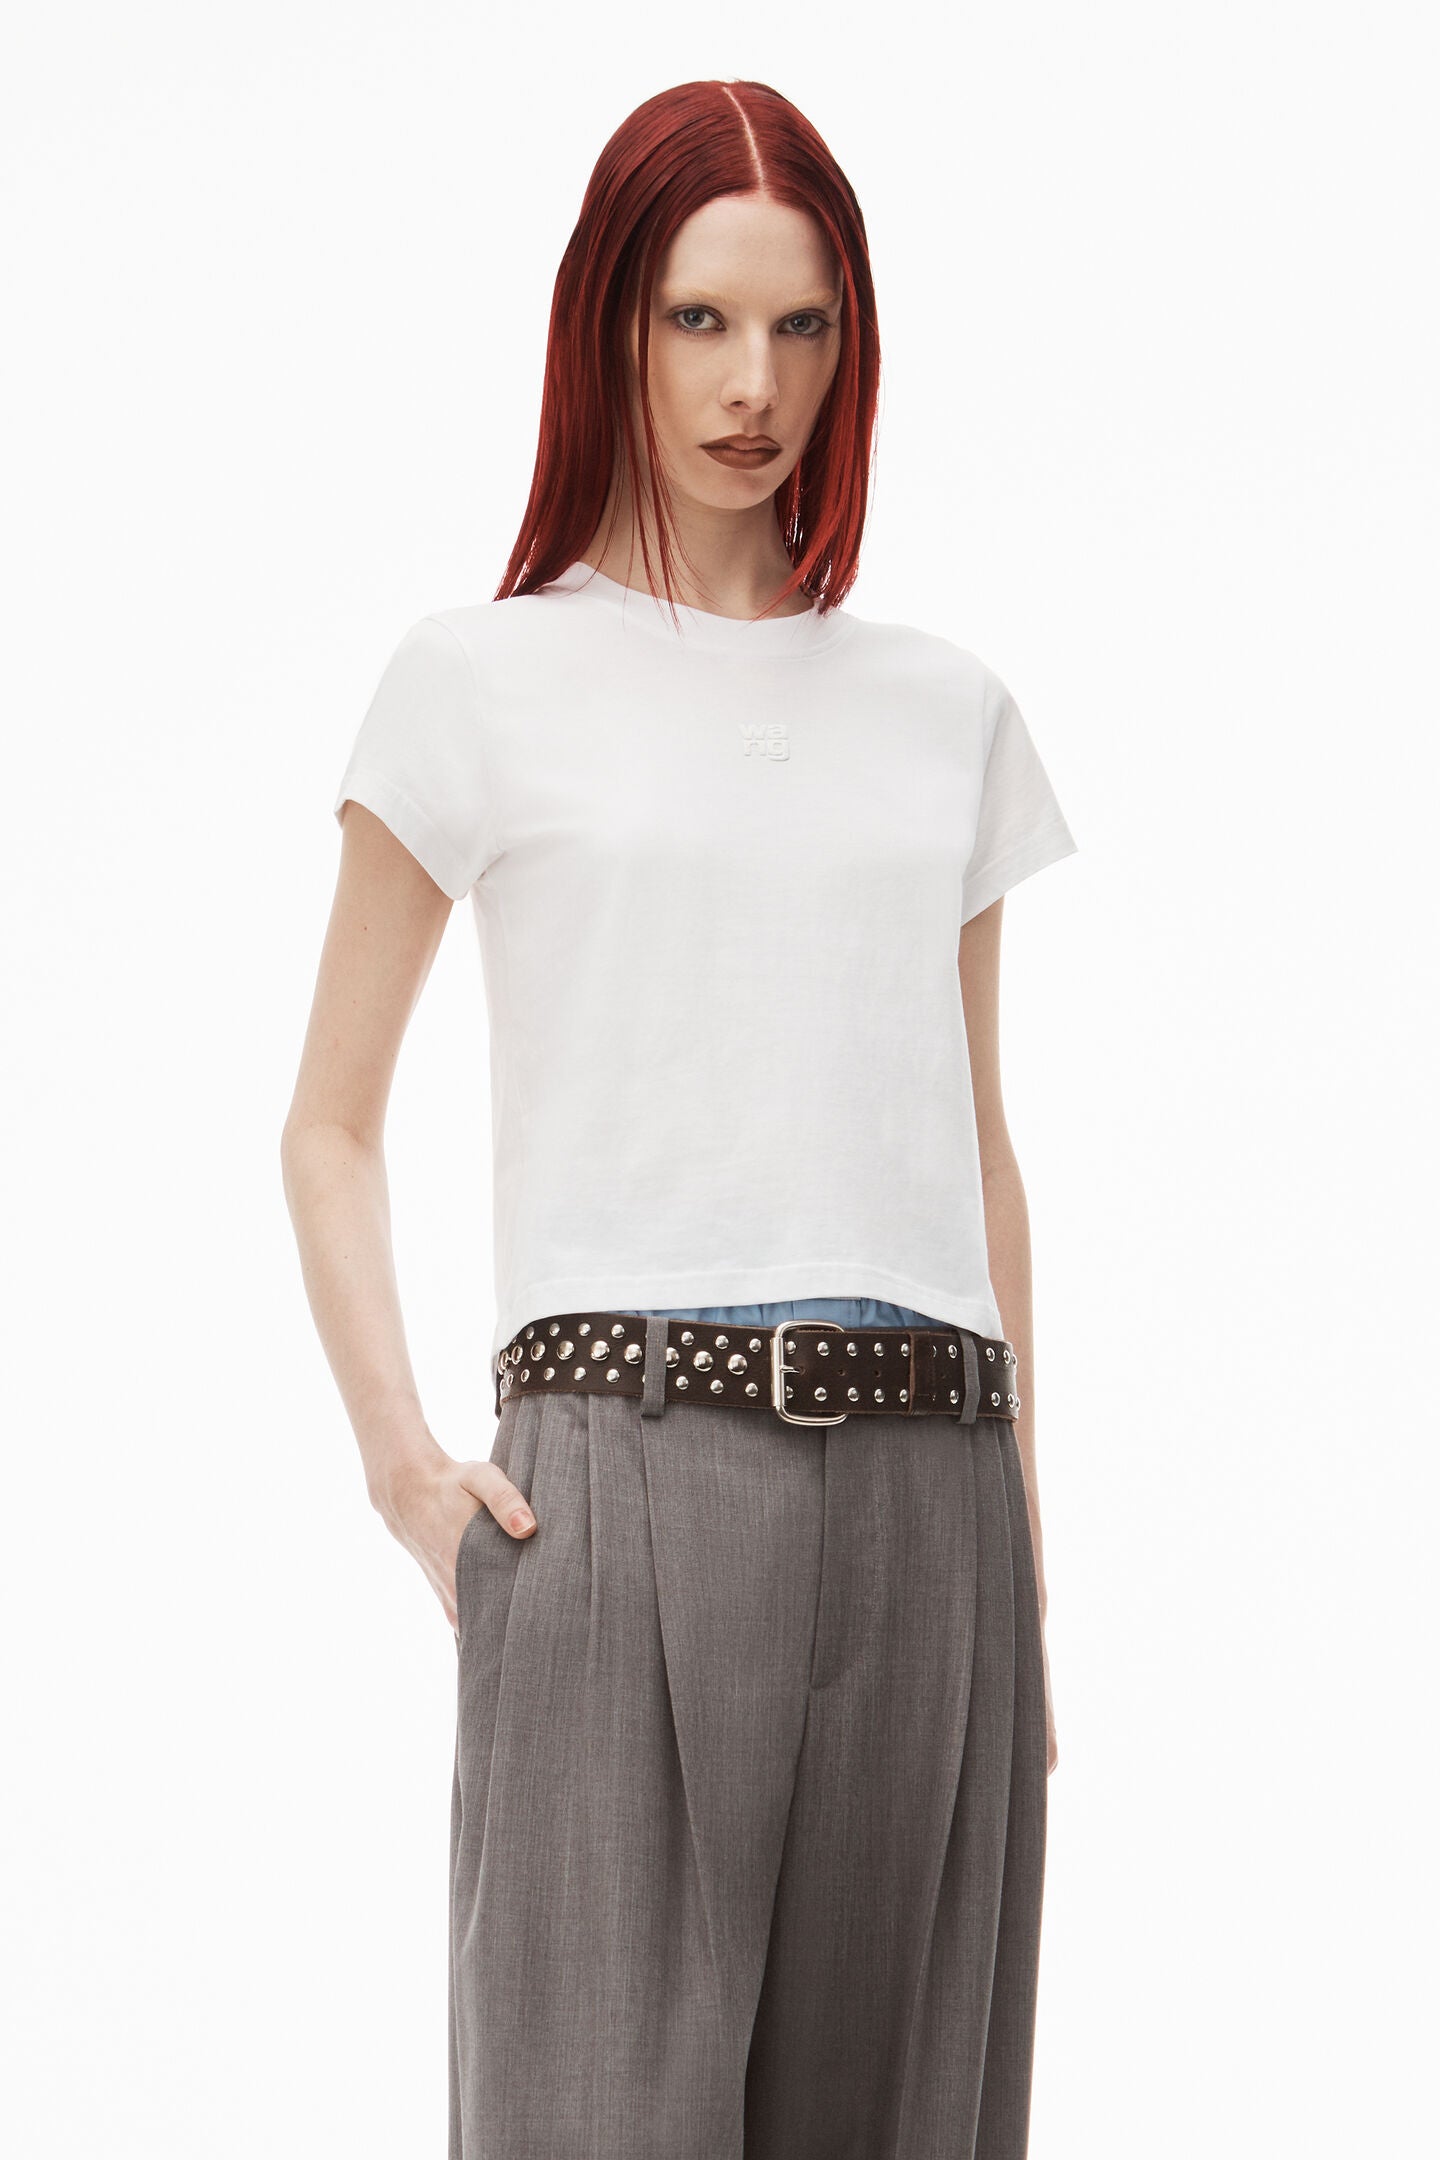 Alexander Wang Essential Jersey Shrunk Tee With Puff Logo available at TNT The New Trend Australia.